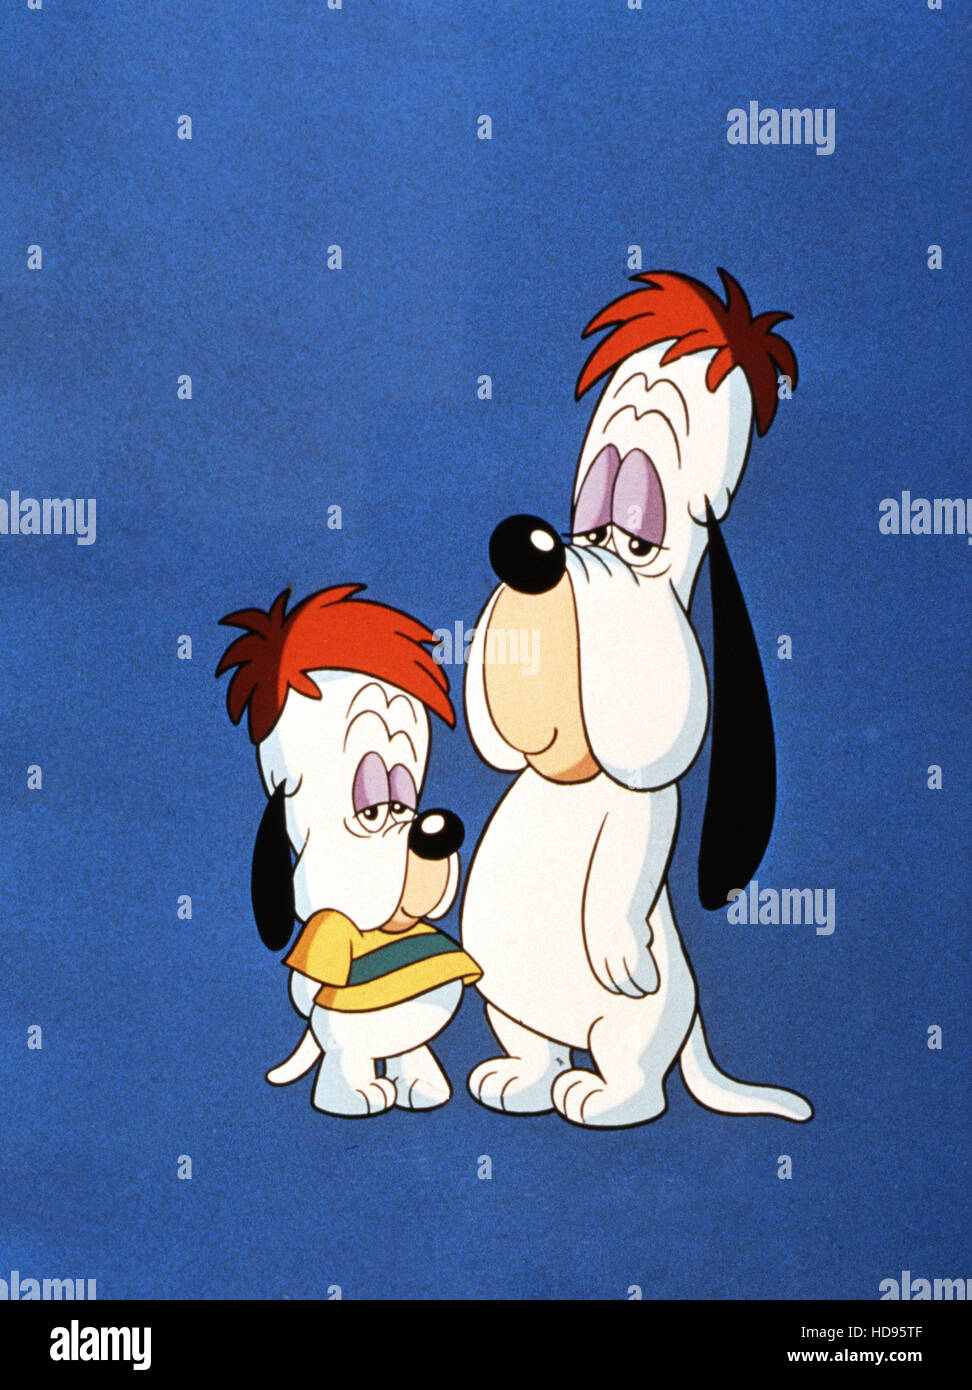 DROOPY: MASTER DETECTIVE, from left: Dripple, Droopy Dog, 1993, © Hanna-Barbera/courtesy Everett Collection Stock Photo